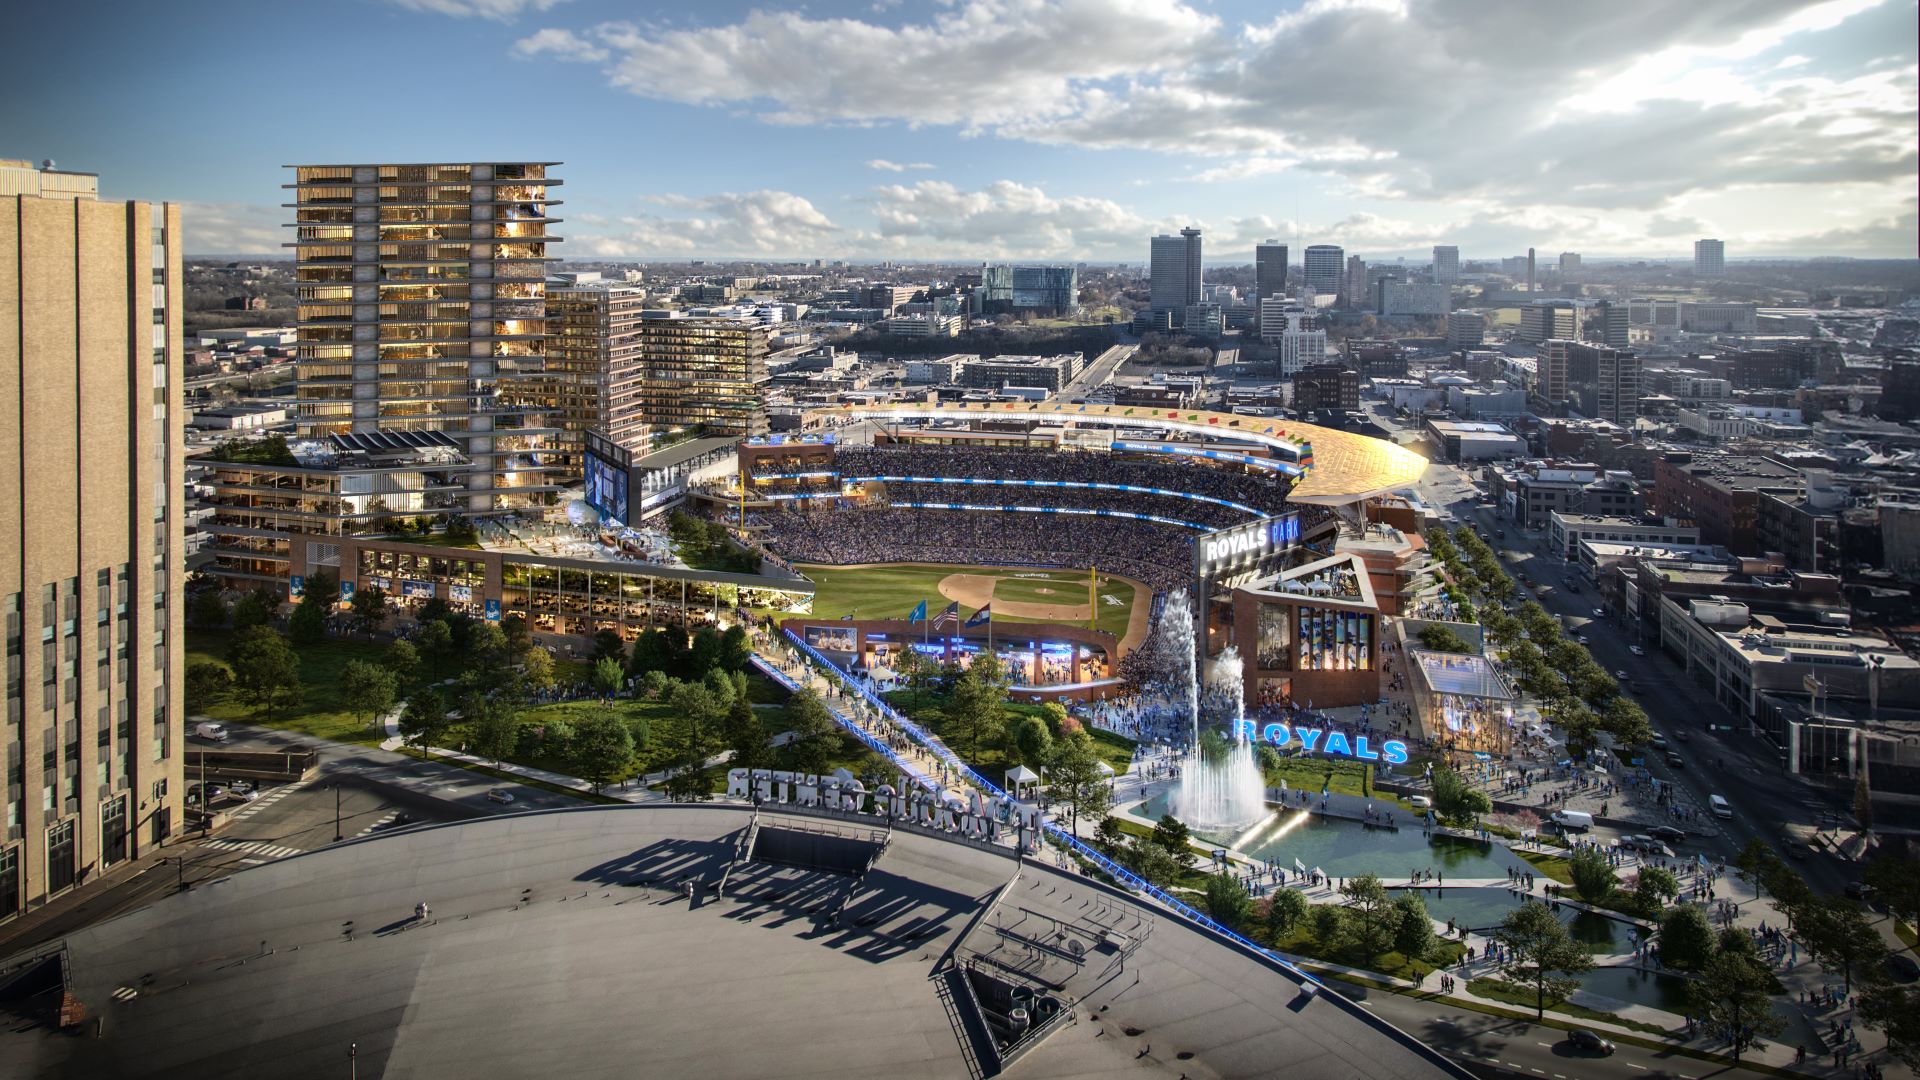 Image - Royals Ballpark Gains Some Support in the Crossroads